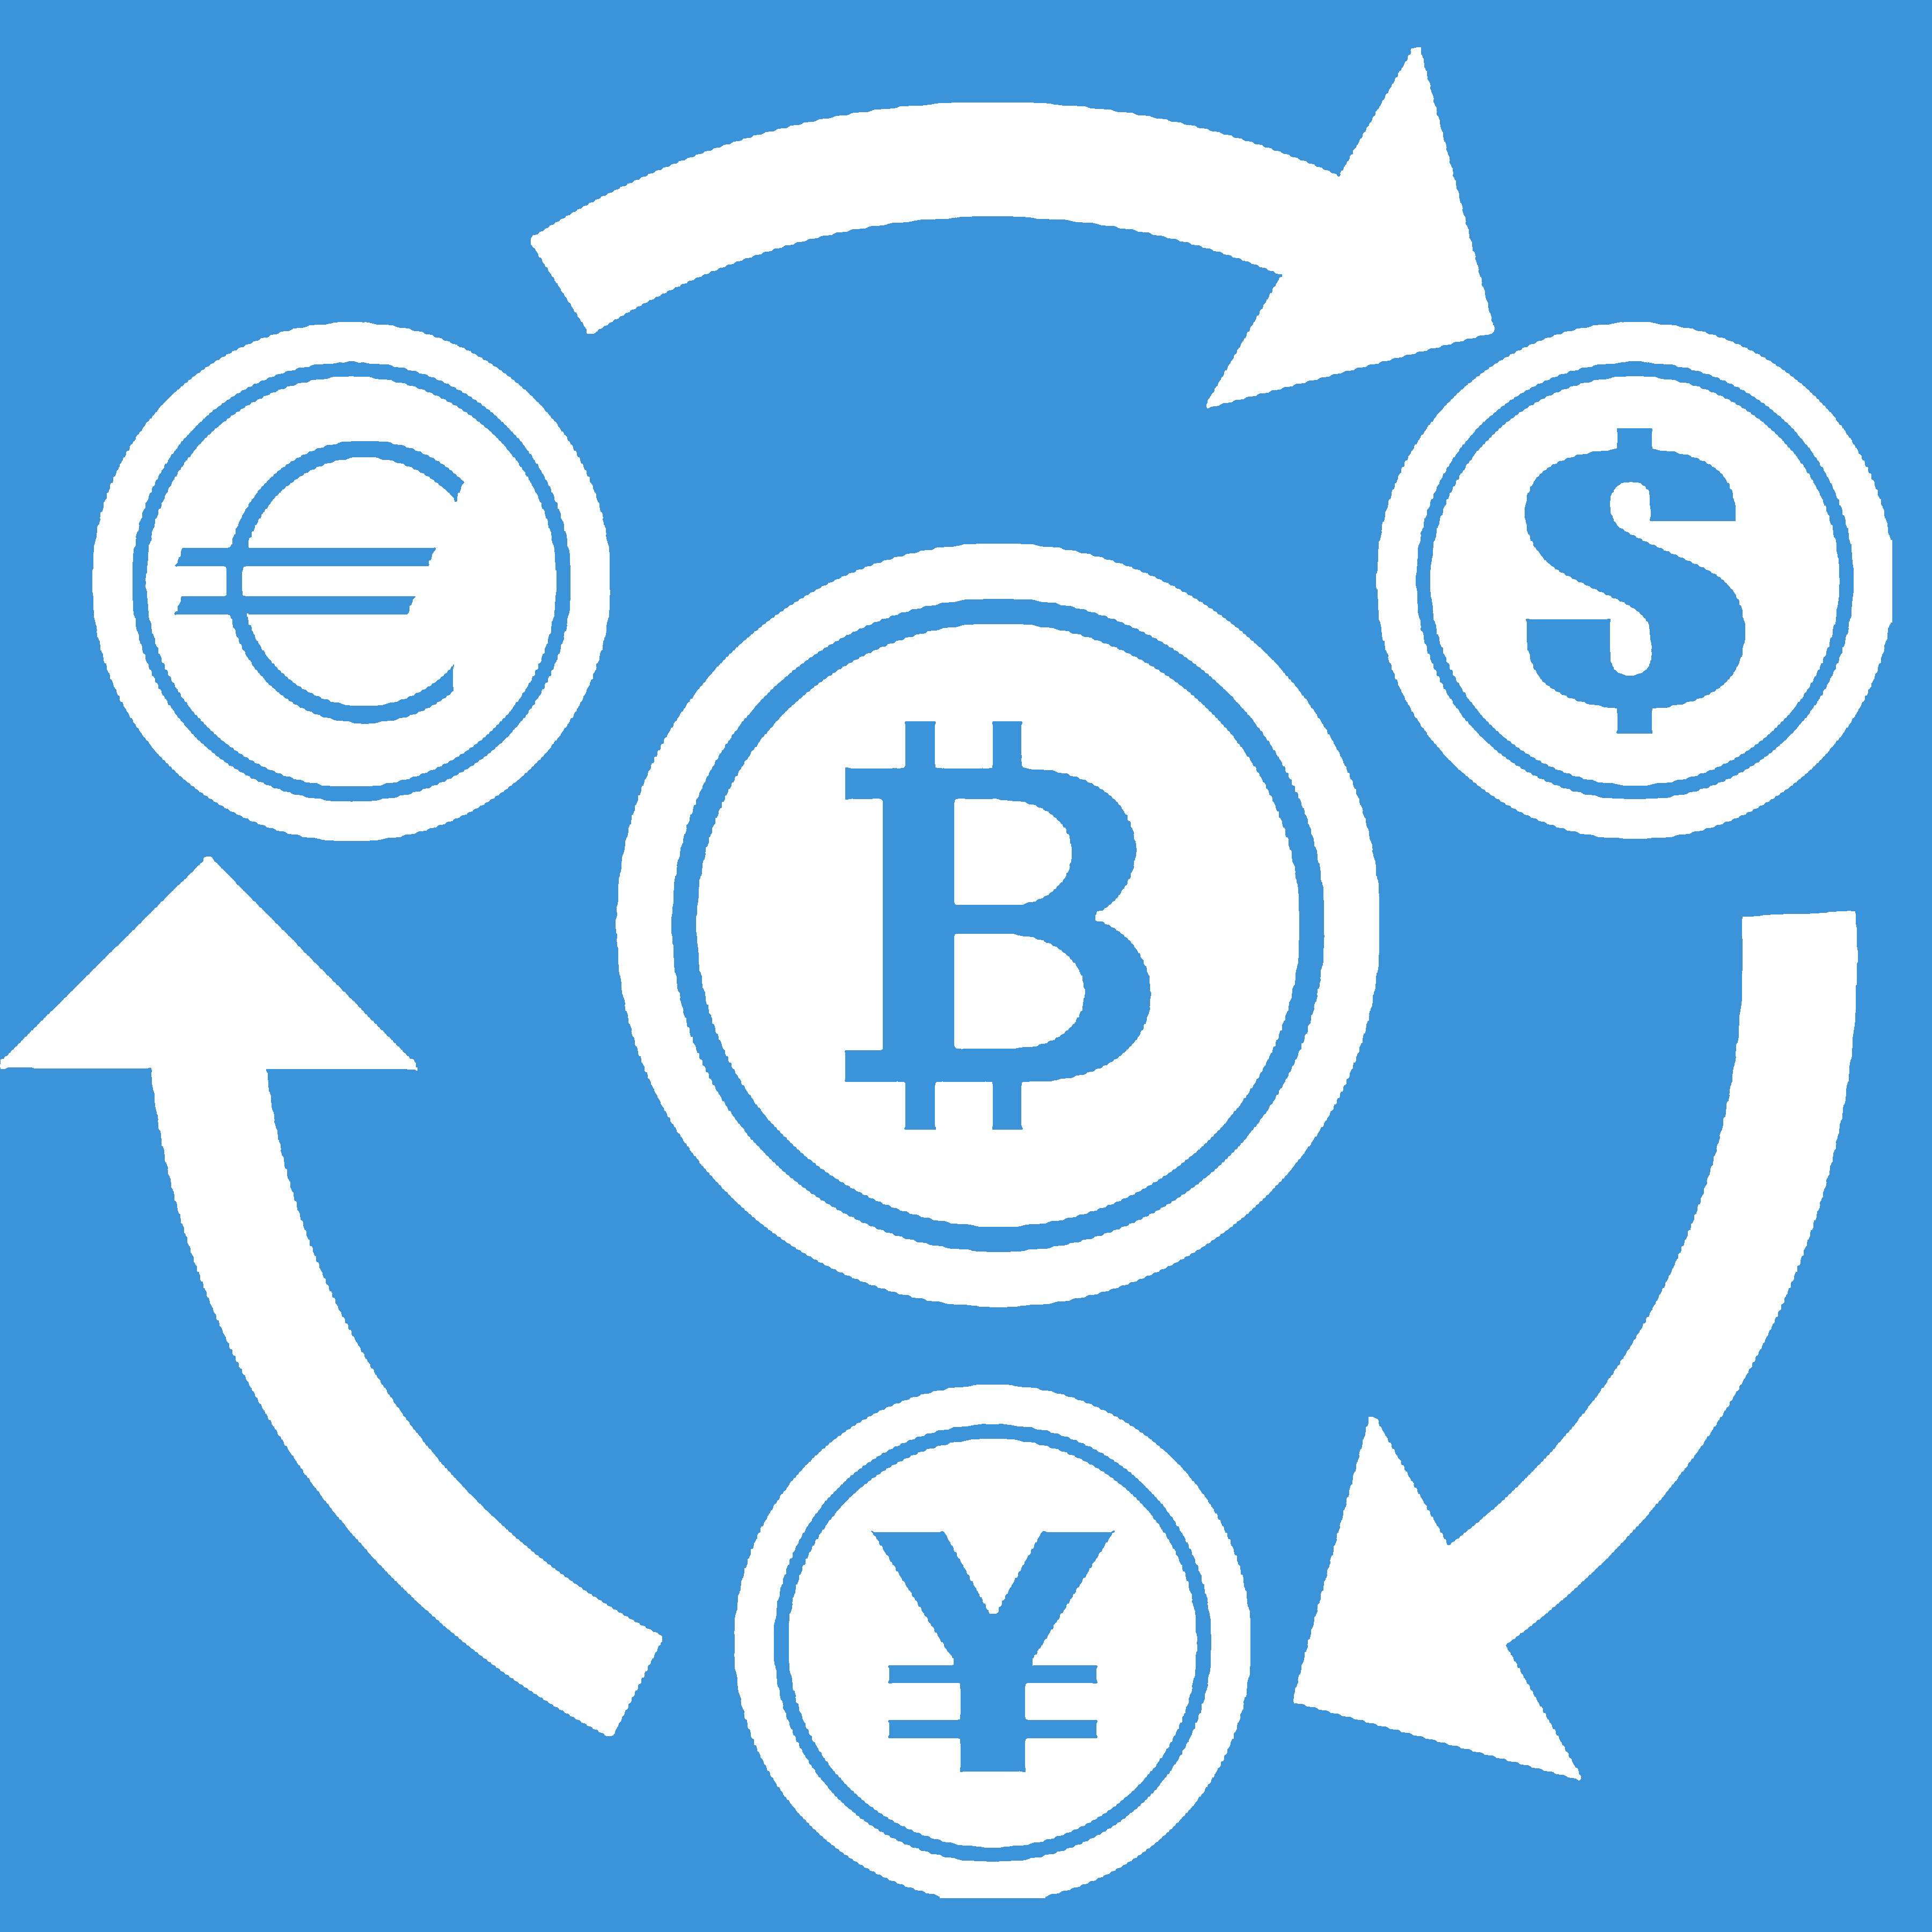 Digital Currencies are an innovative medium of exchange that allow us to make frictionless global payments.